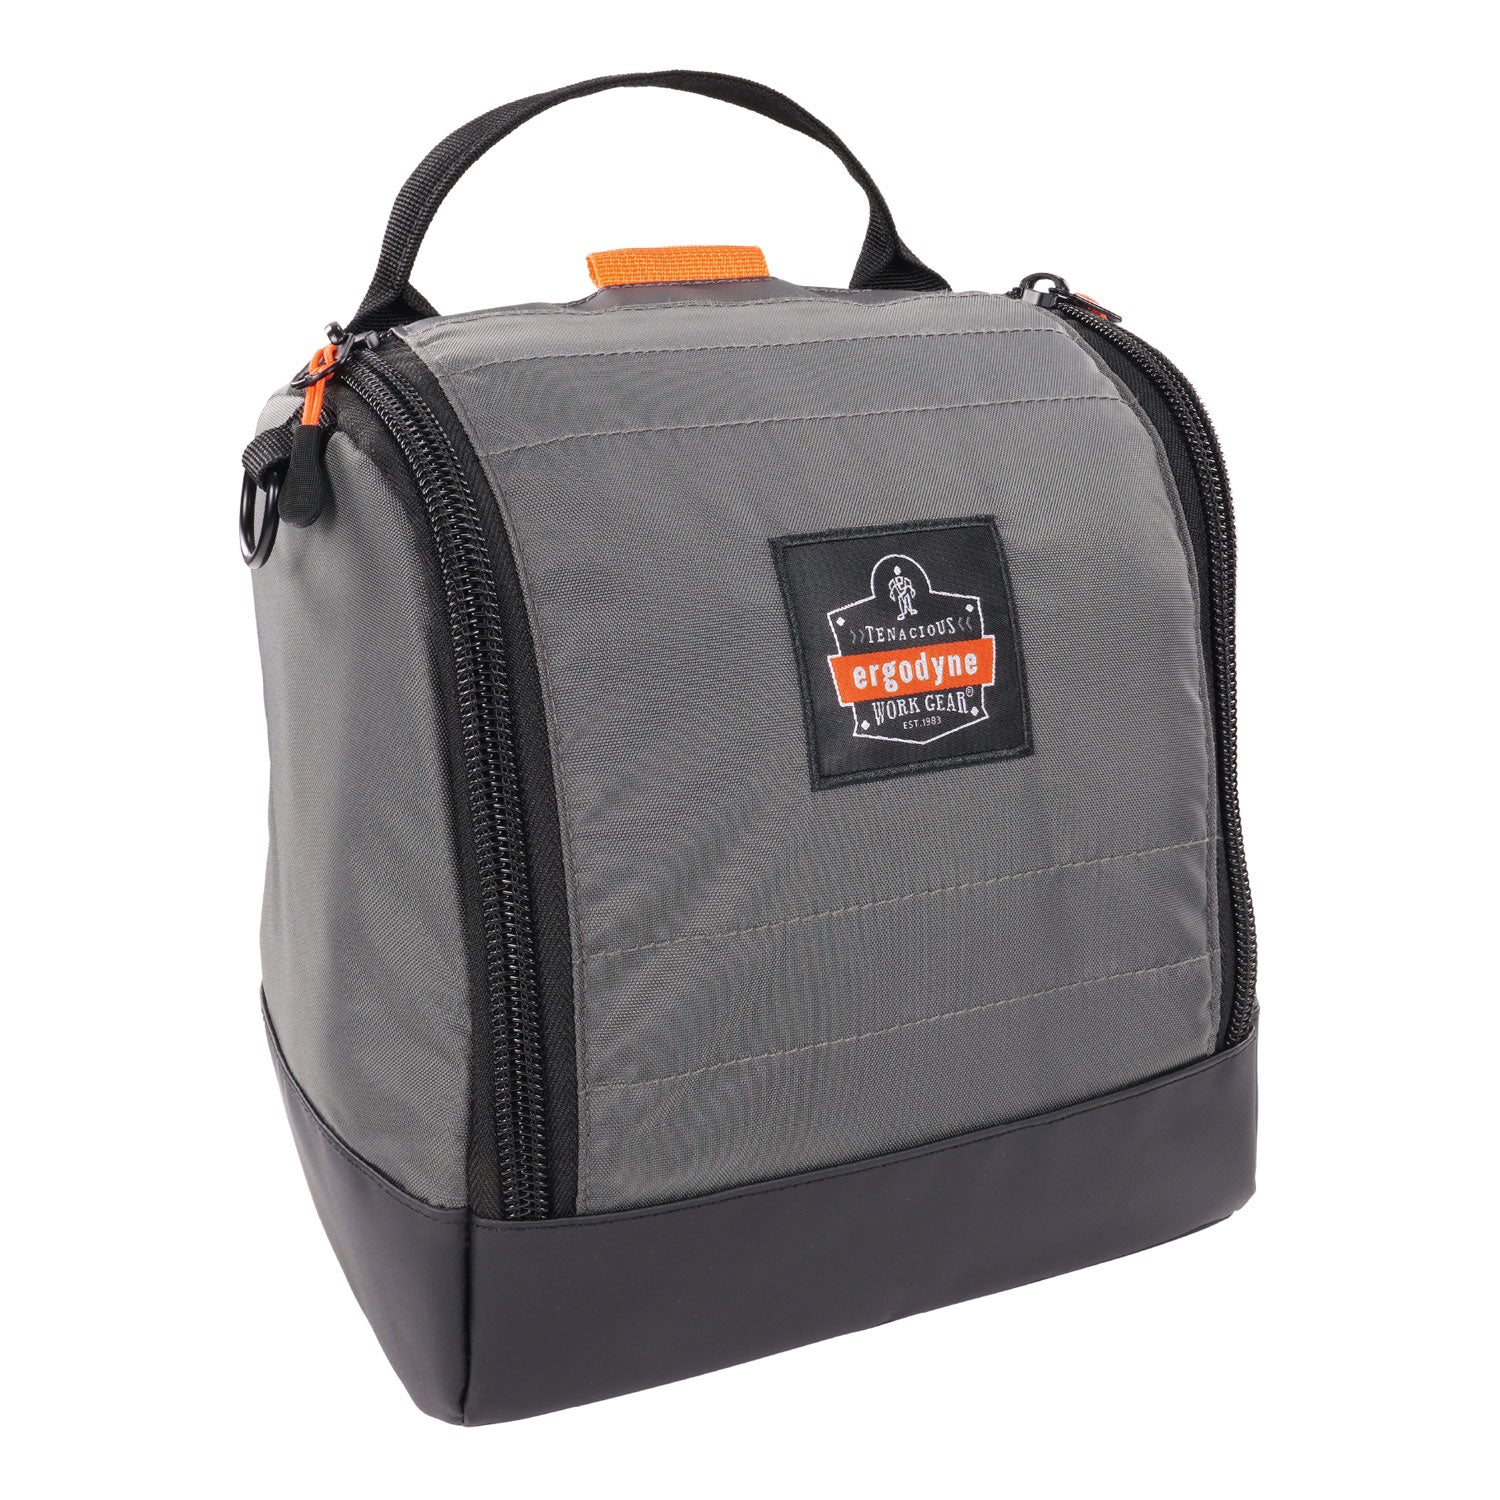 arsenal-5185-full-respirator-bag-with-zipper-magnetic-closure-55-x-95-x-95-gray-ships-in-1-3-business-days_ego13185 - 1